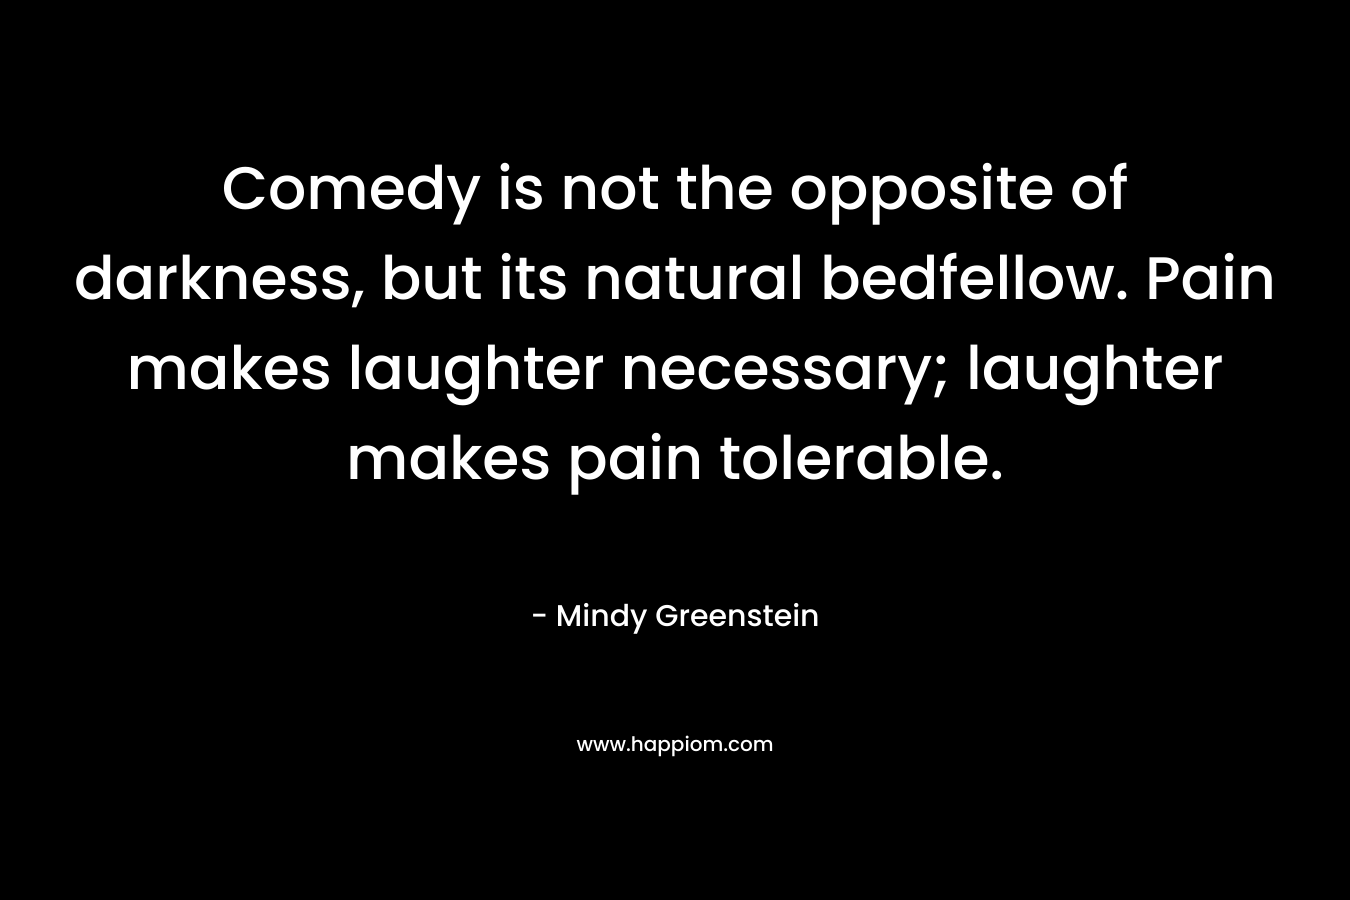 Comedy is not the opposite of darkness, but its natural bedfellow. Pain makes laughter necessary; laughter makes pain tolerable.